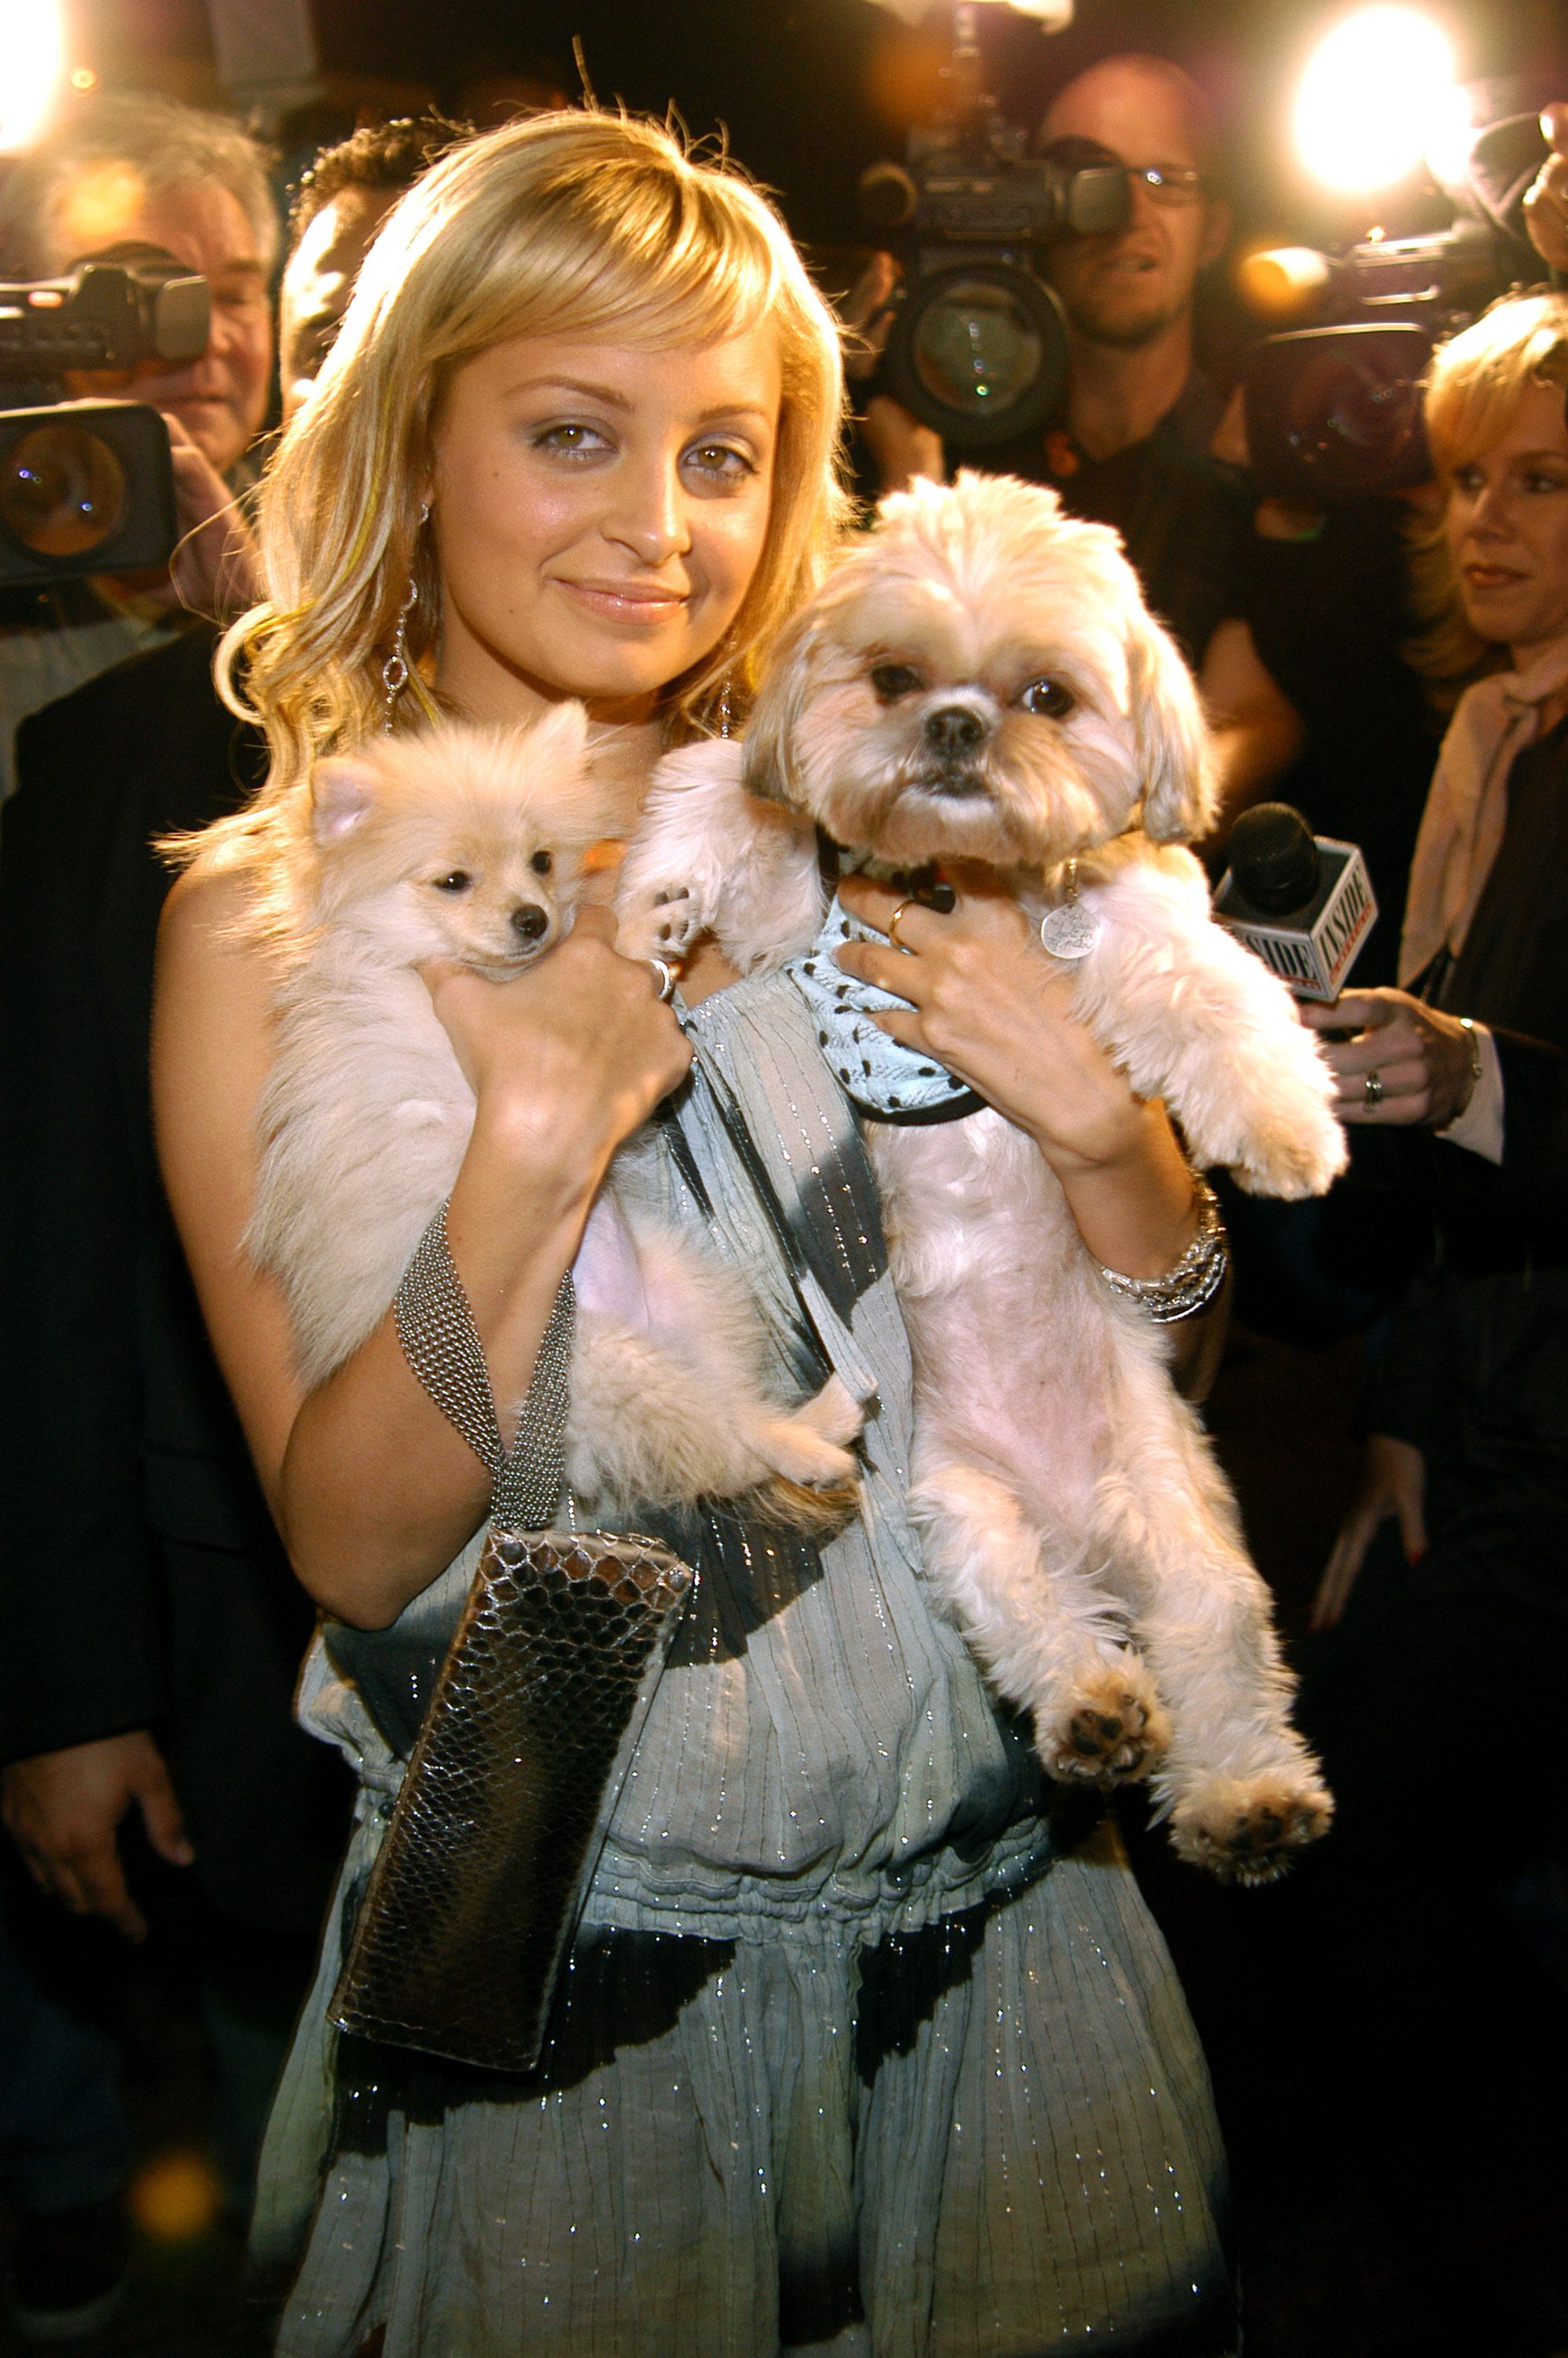 Nicole Richie with her Shih tzu and Pomeranian in her arms with cameras and reporters in the background